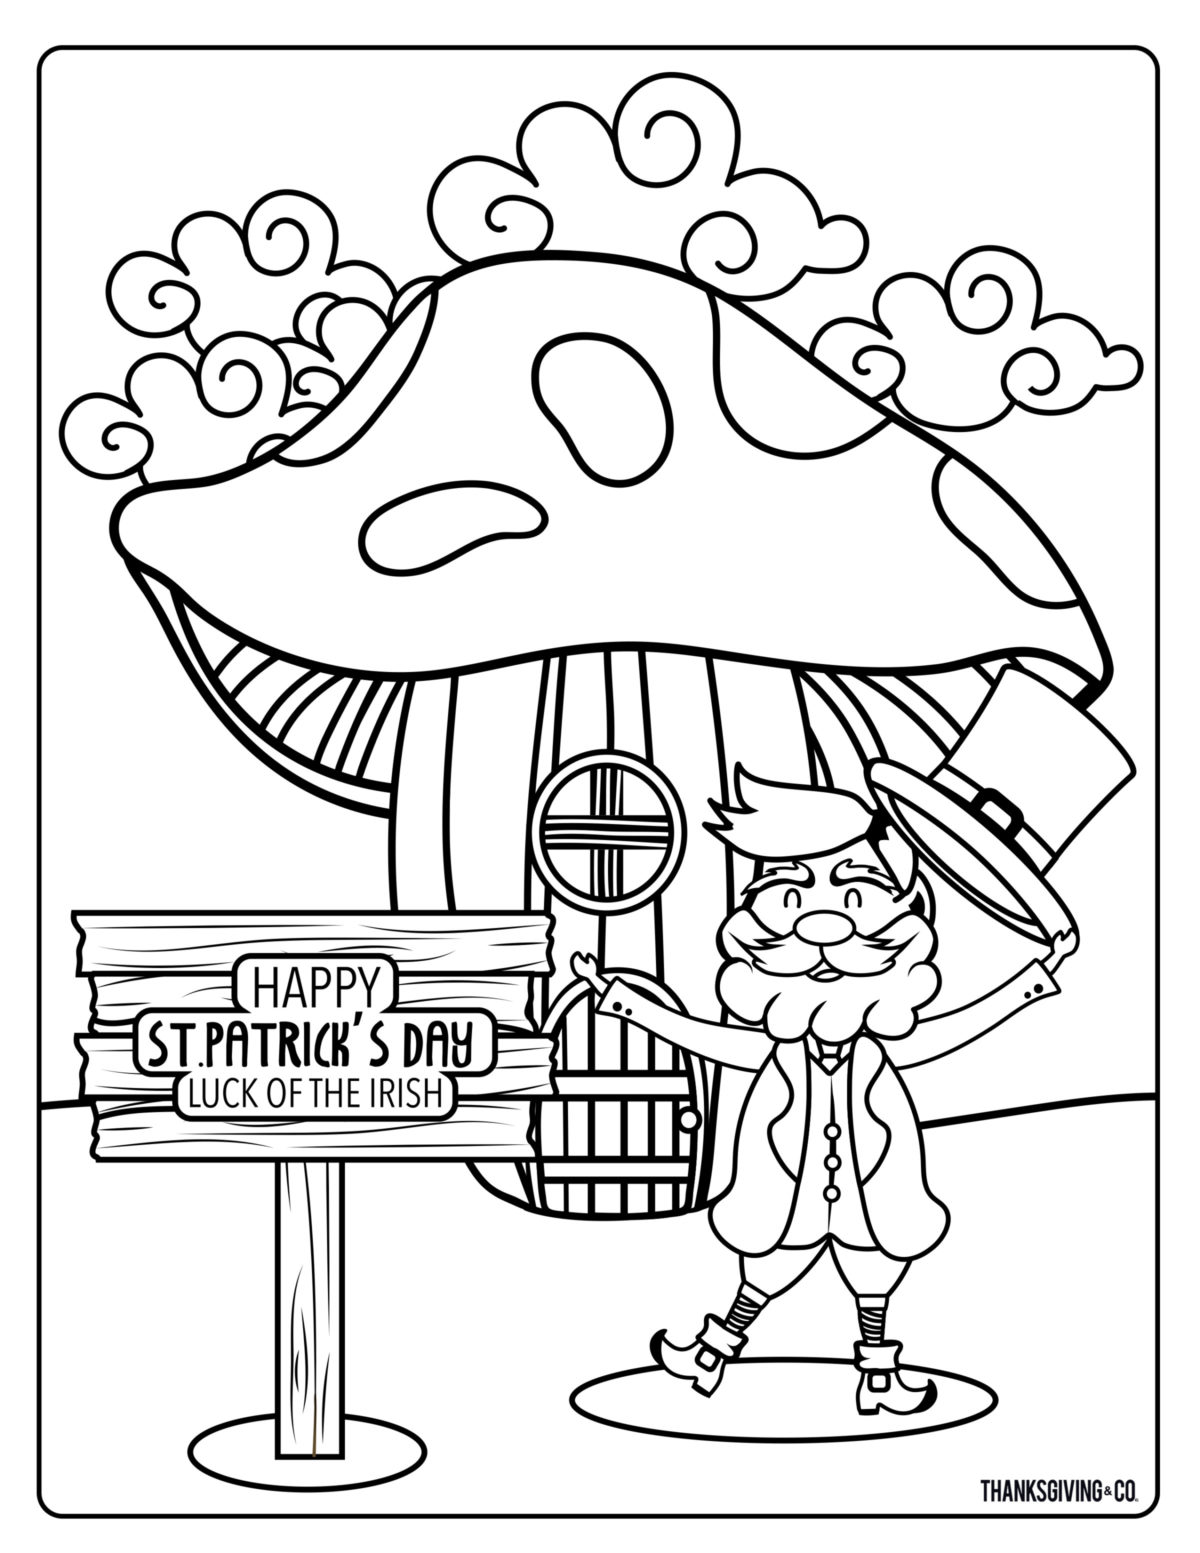 20 printable, whimsical St. Patrick's Day coloring pages for kids